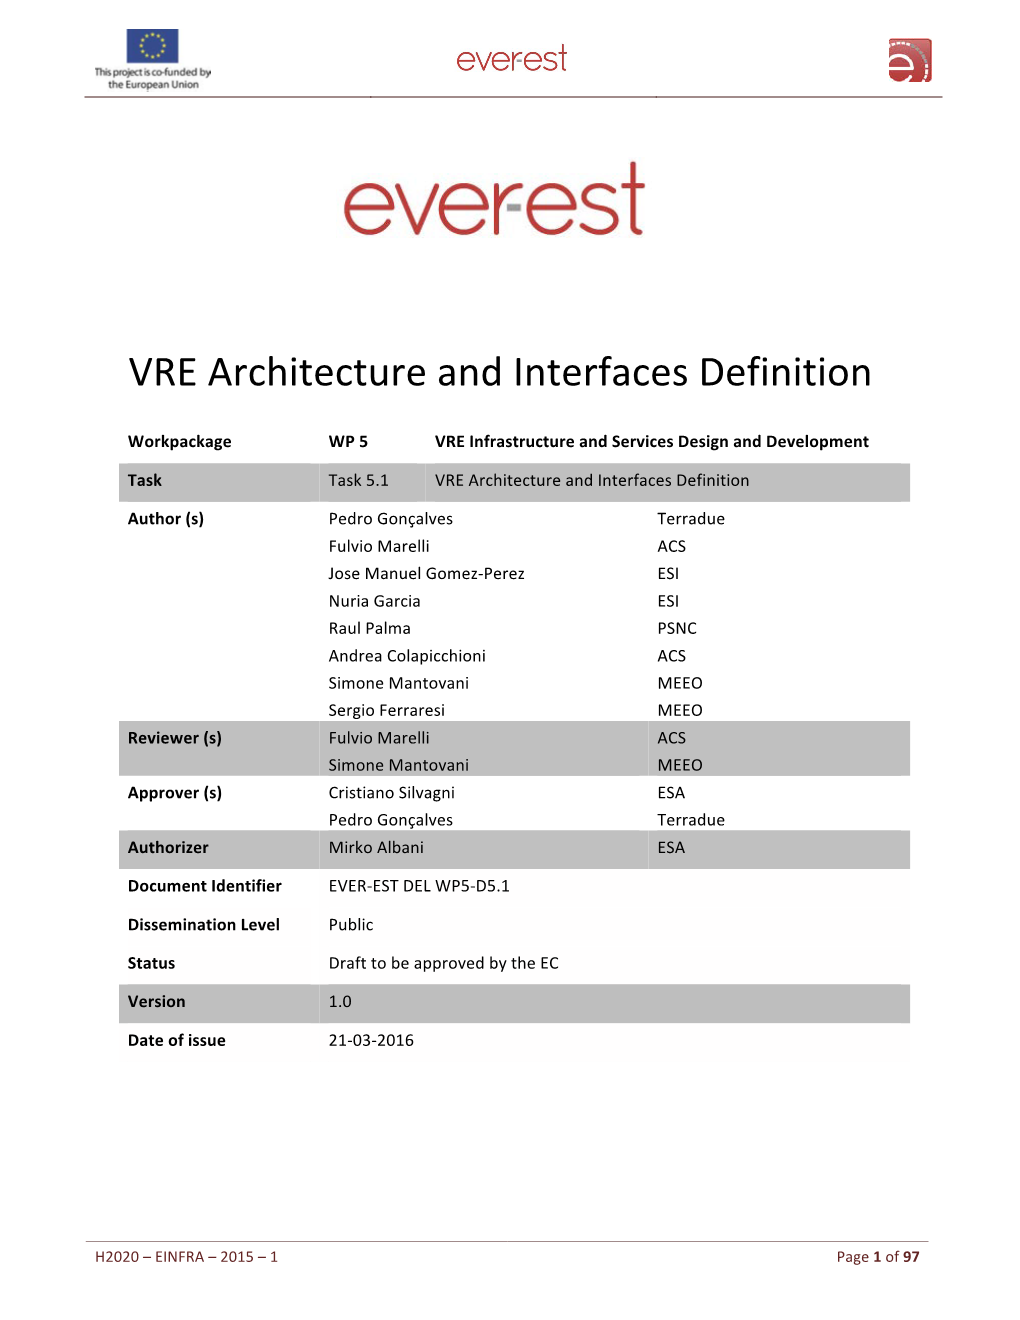 VRE Architecture and Interfaces Definition